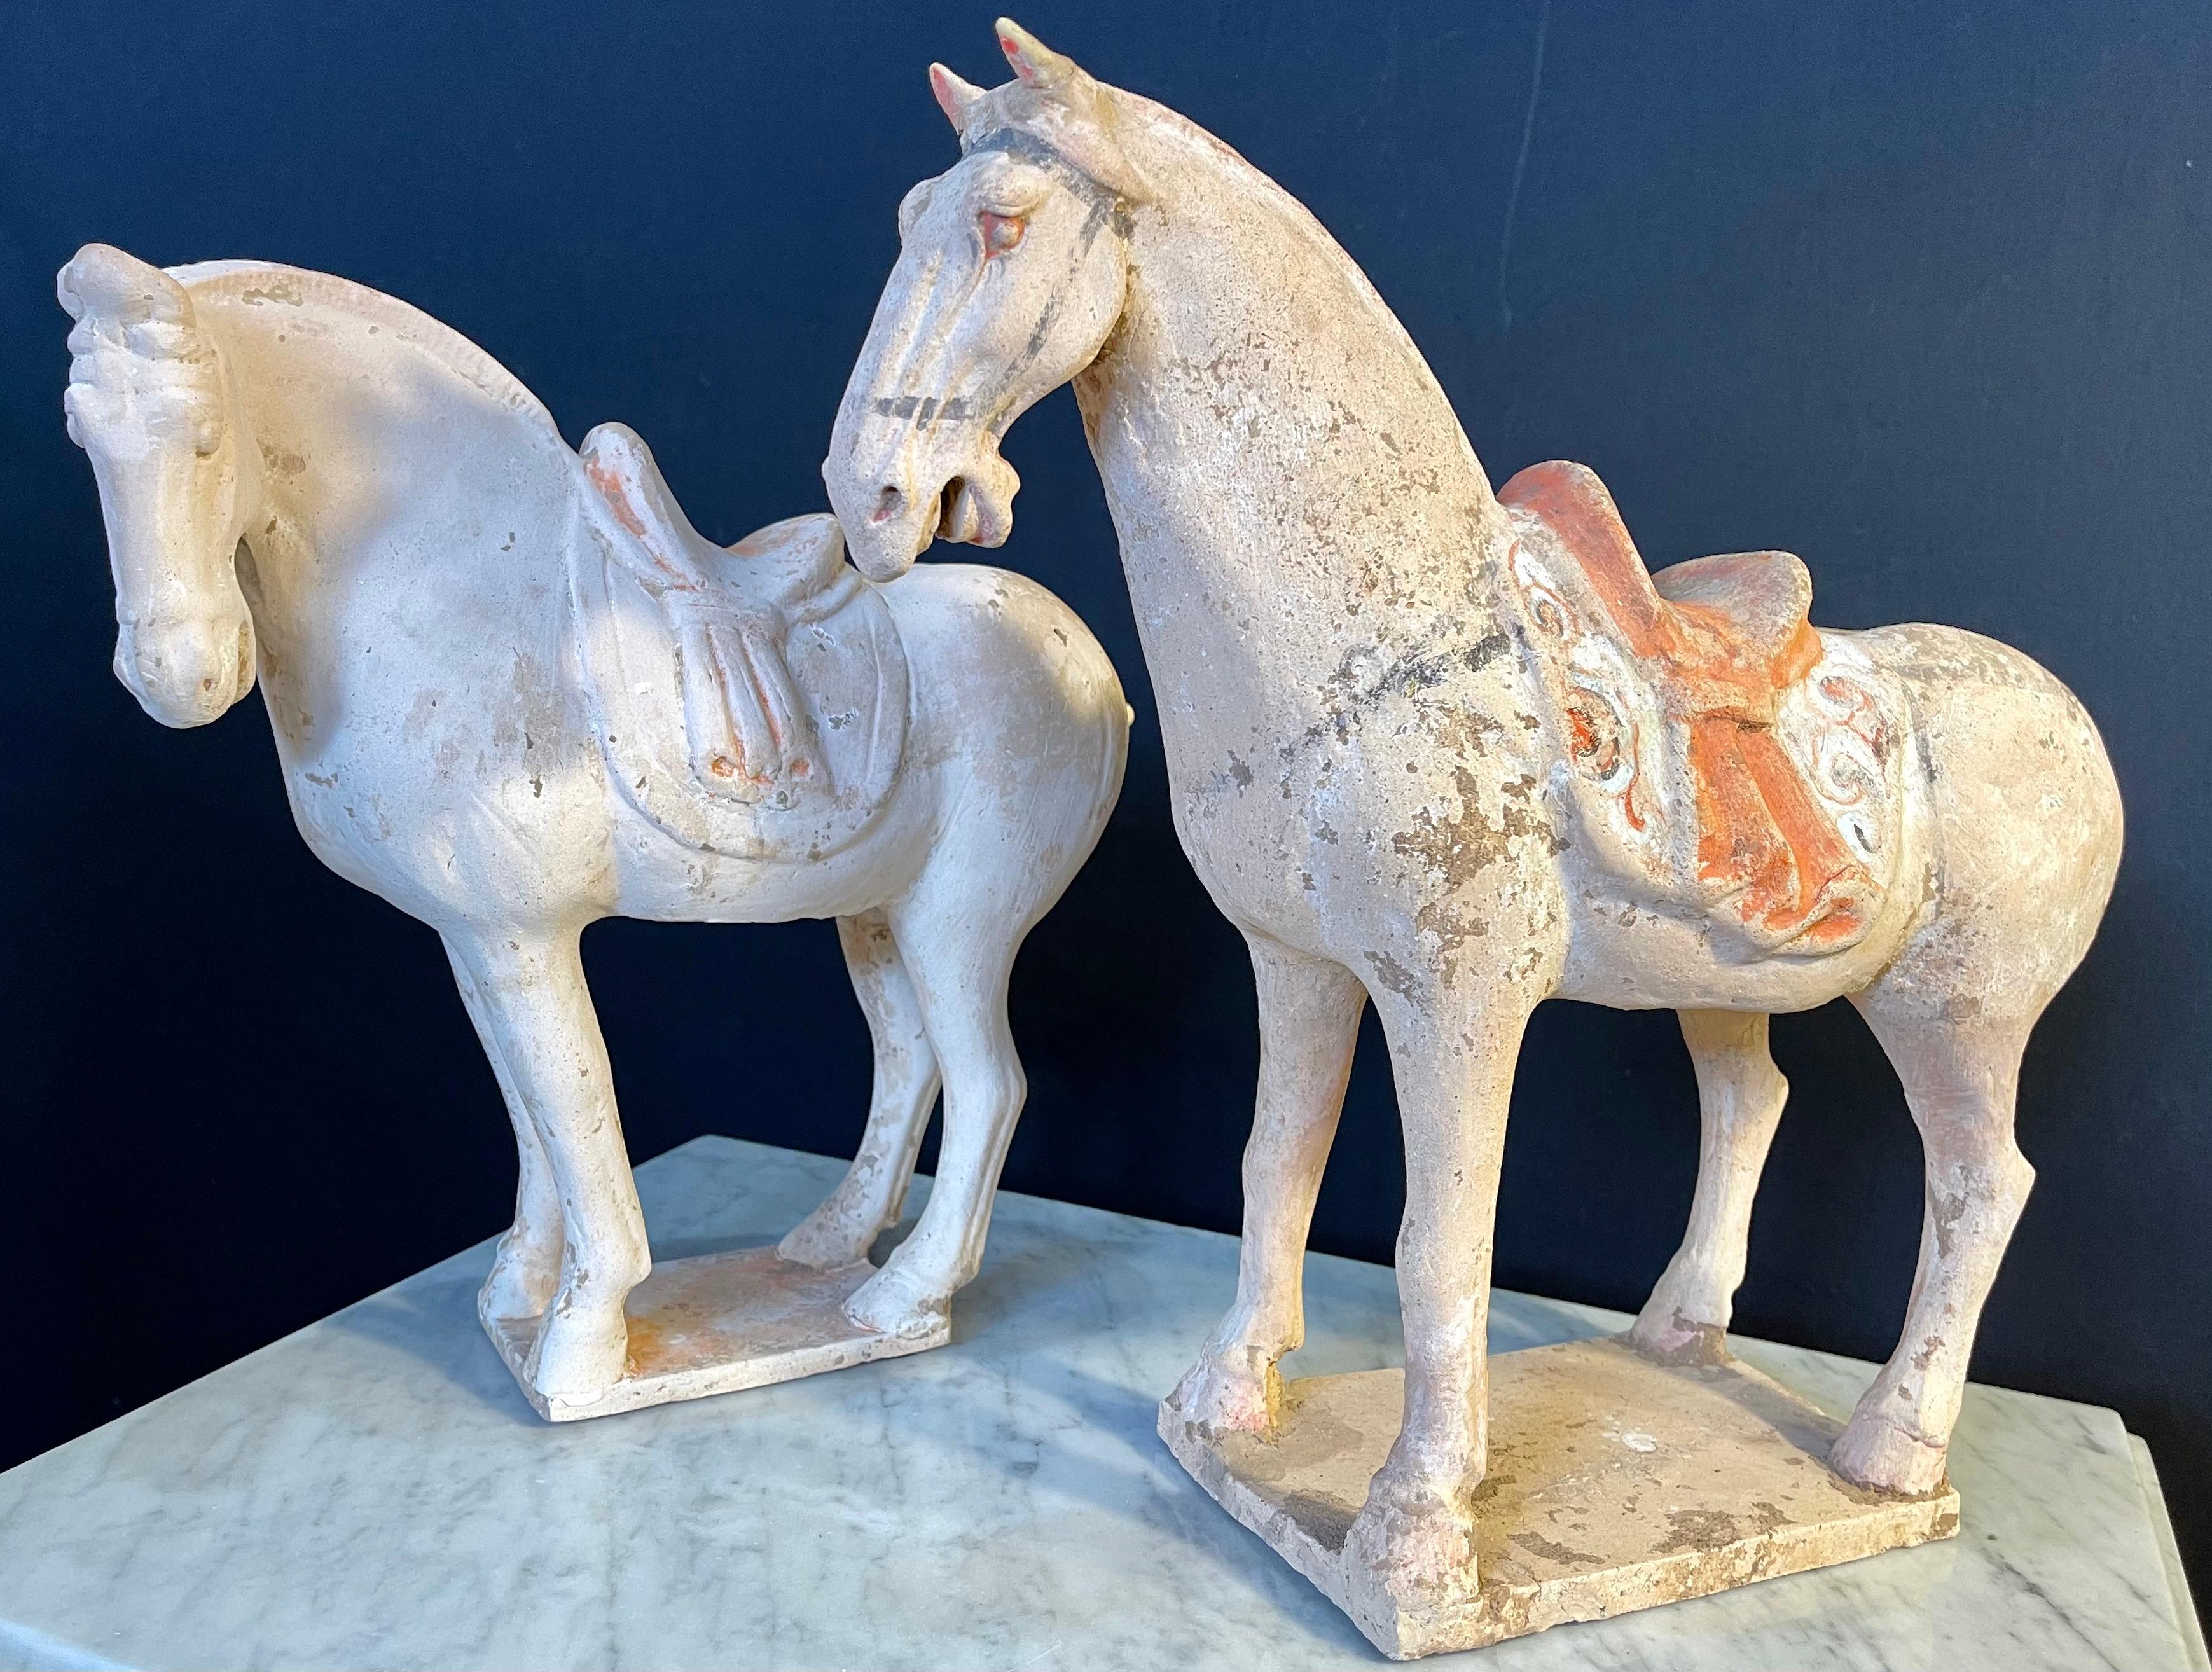 Pair of tang style pottery horses. Roof tile manner, both left facing with matching scalloped saddle drapes (one broken and missing), nice polychrome. One tail broken and repaired. Price accordingly.
1qS.